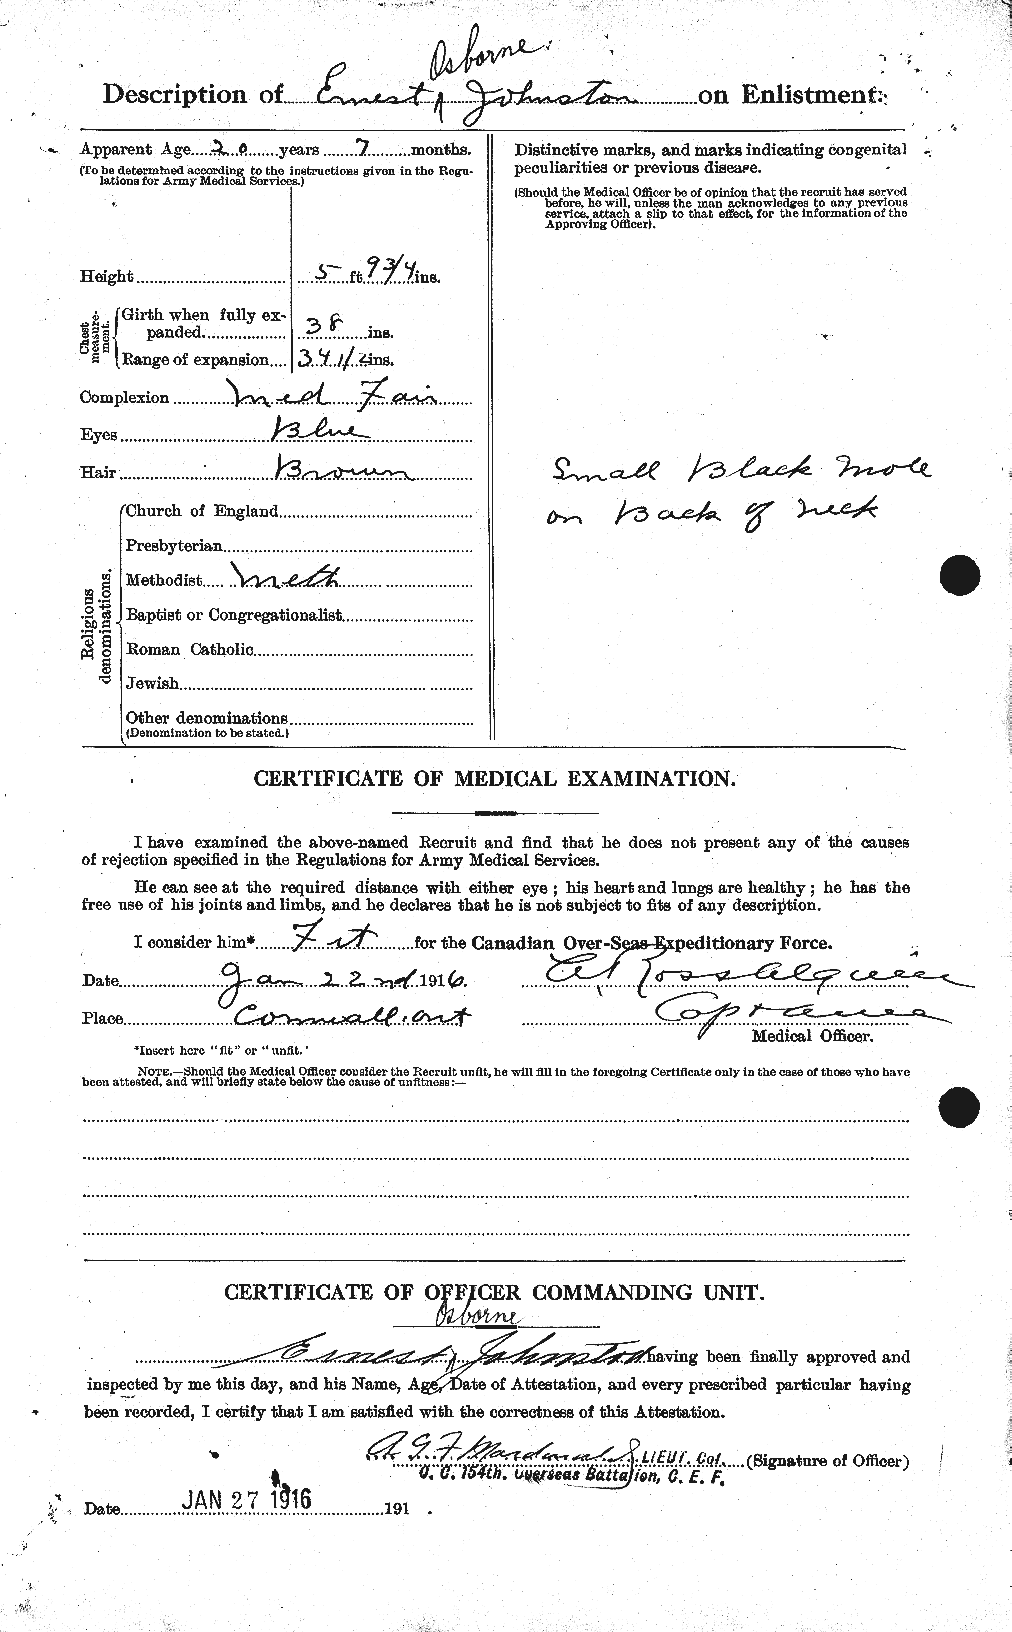 Personnel Records of the First World War - CEF 423248b